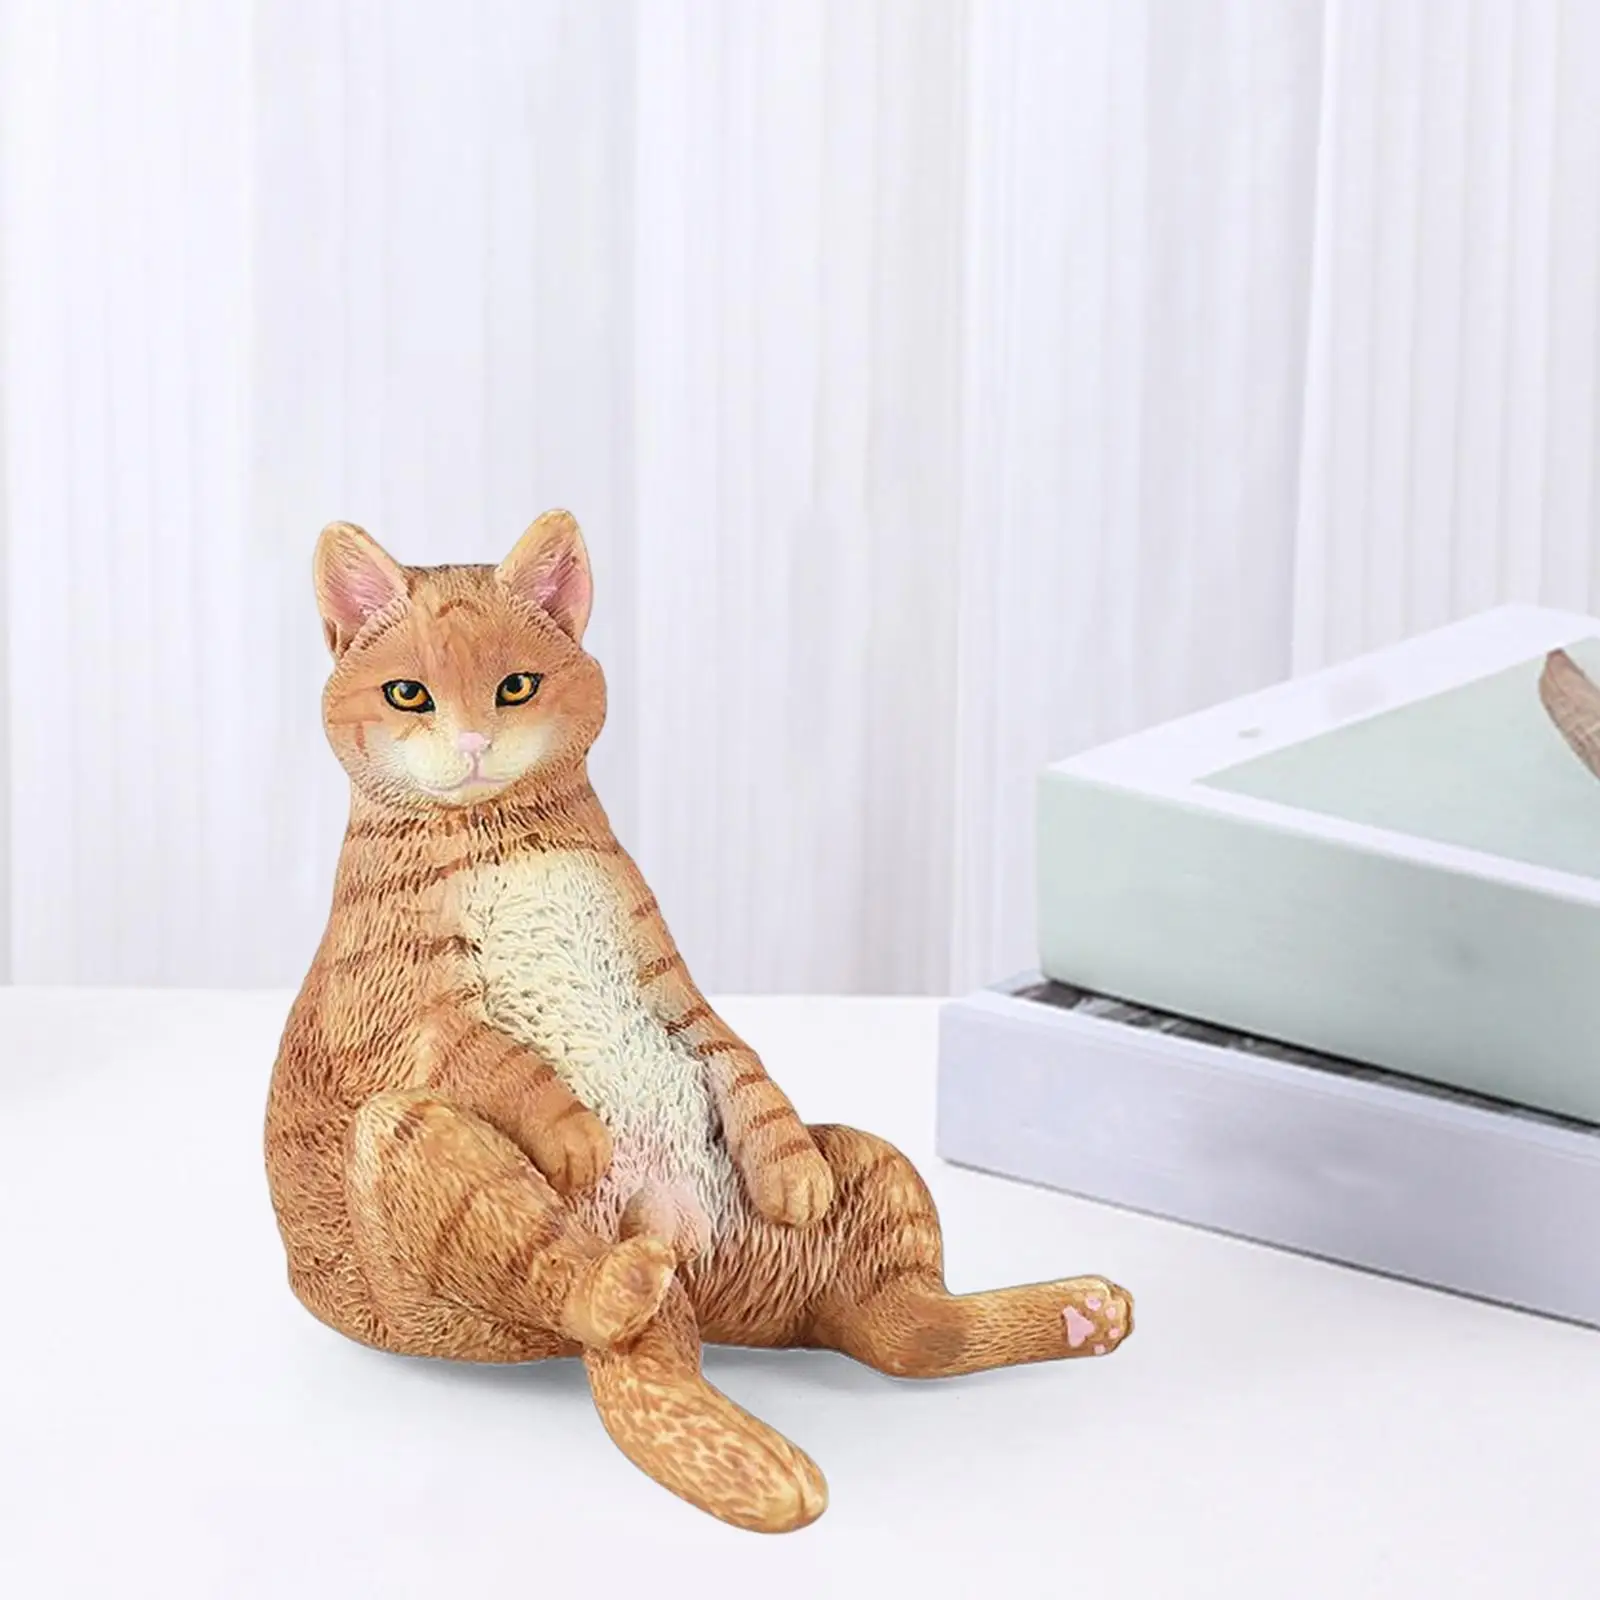 Simulation Cat Model Figurine Collection Playset Small Cat Figurines Toy, Animal Figurines Diorama, for Home Decoration Gifts